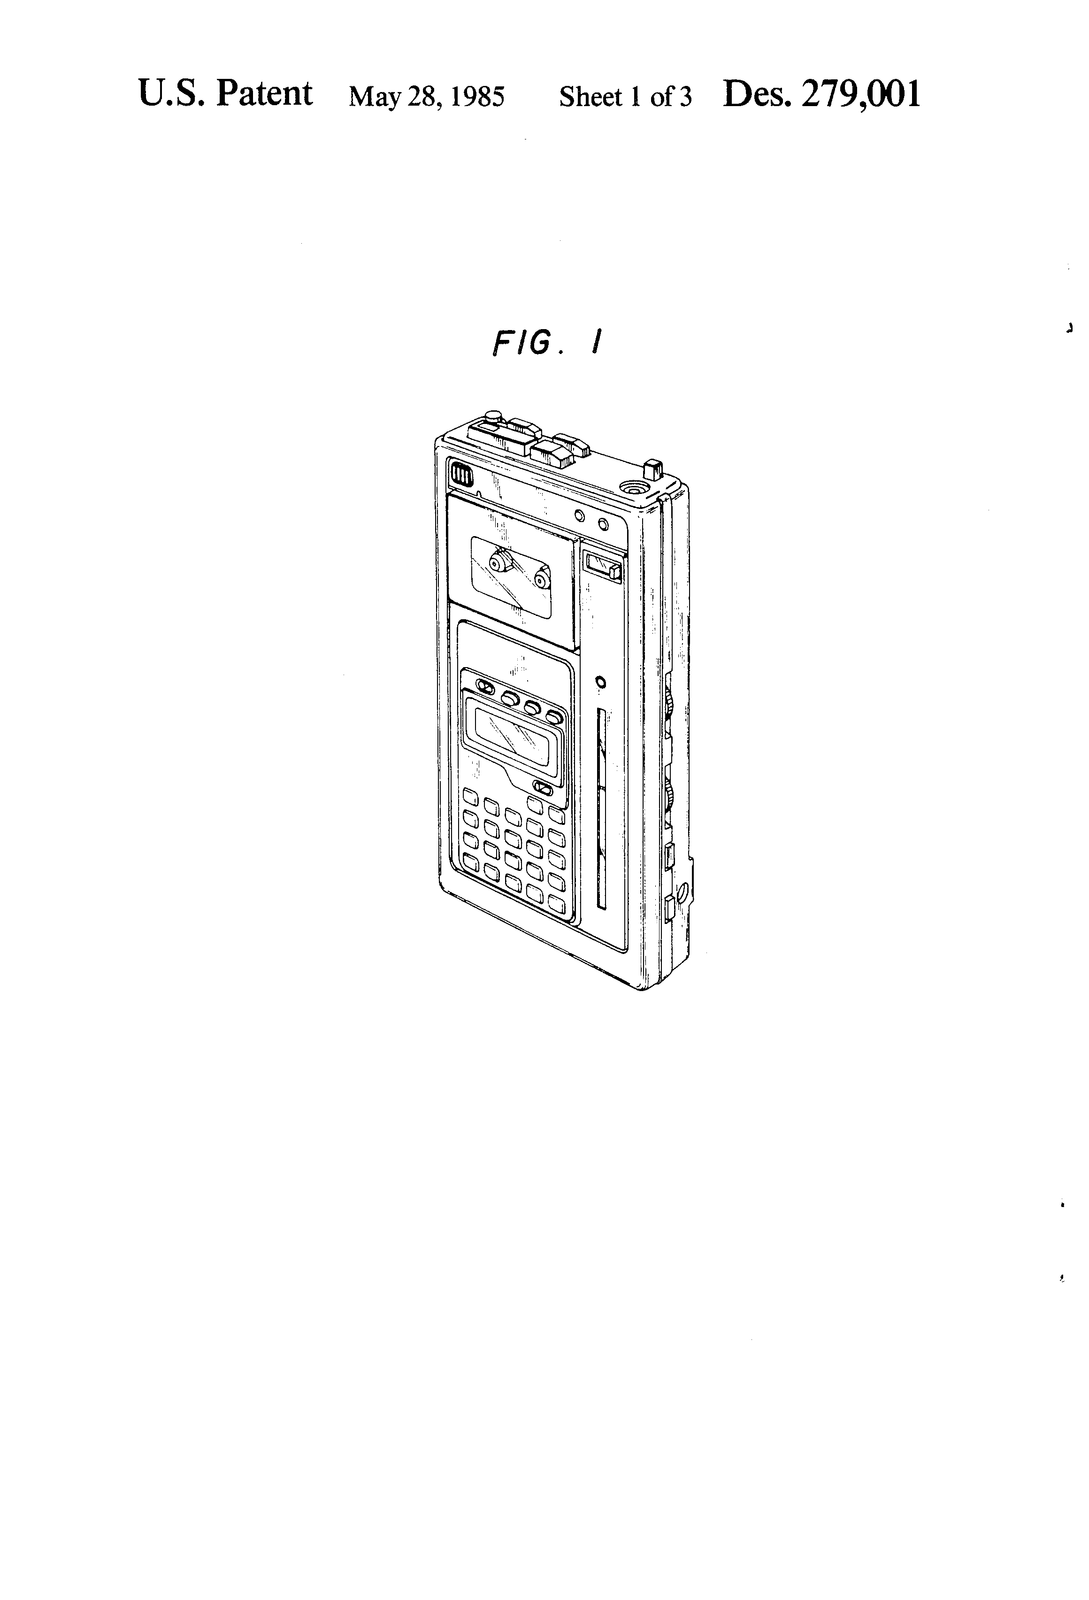 USD279001-1.png